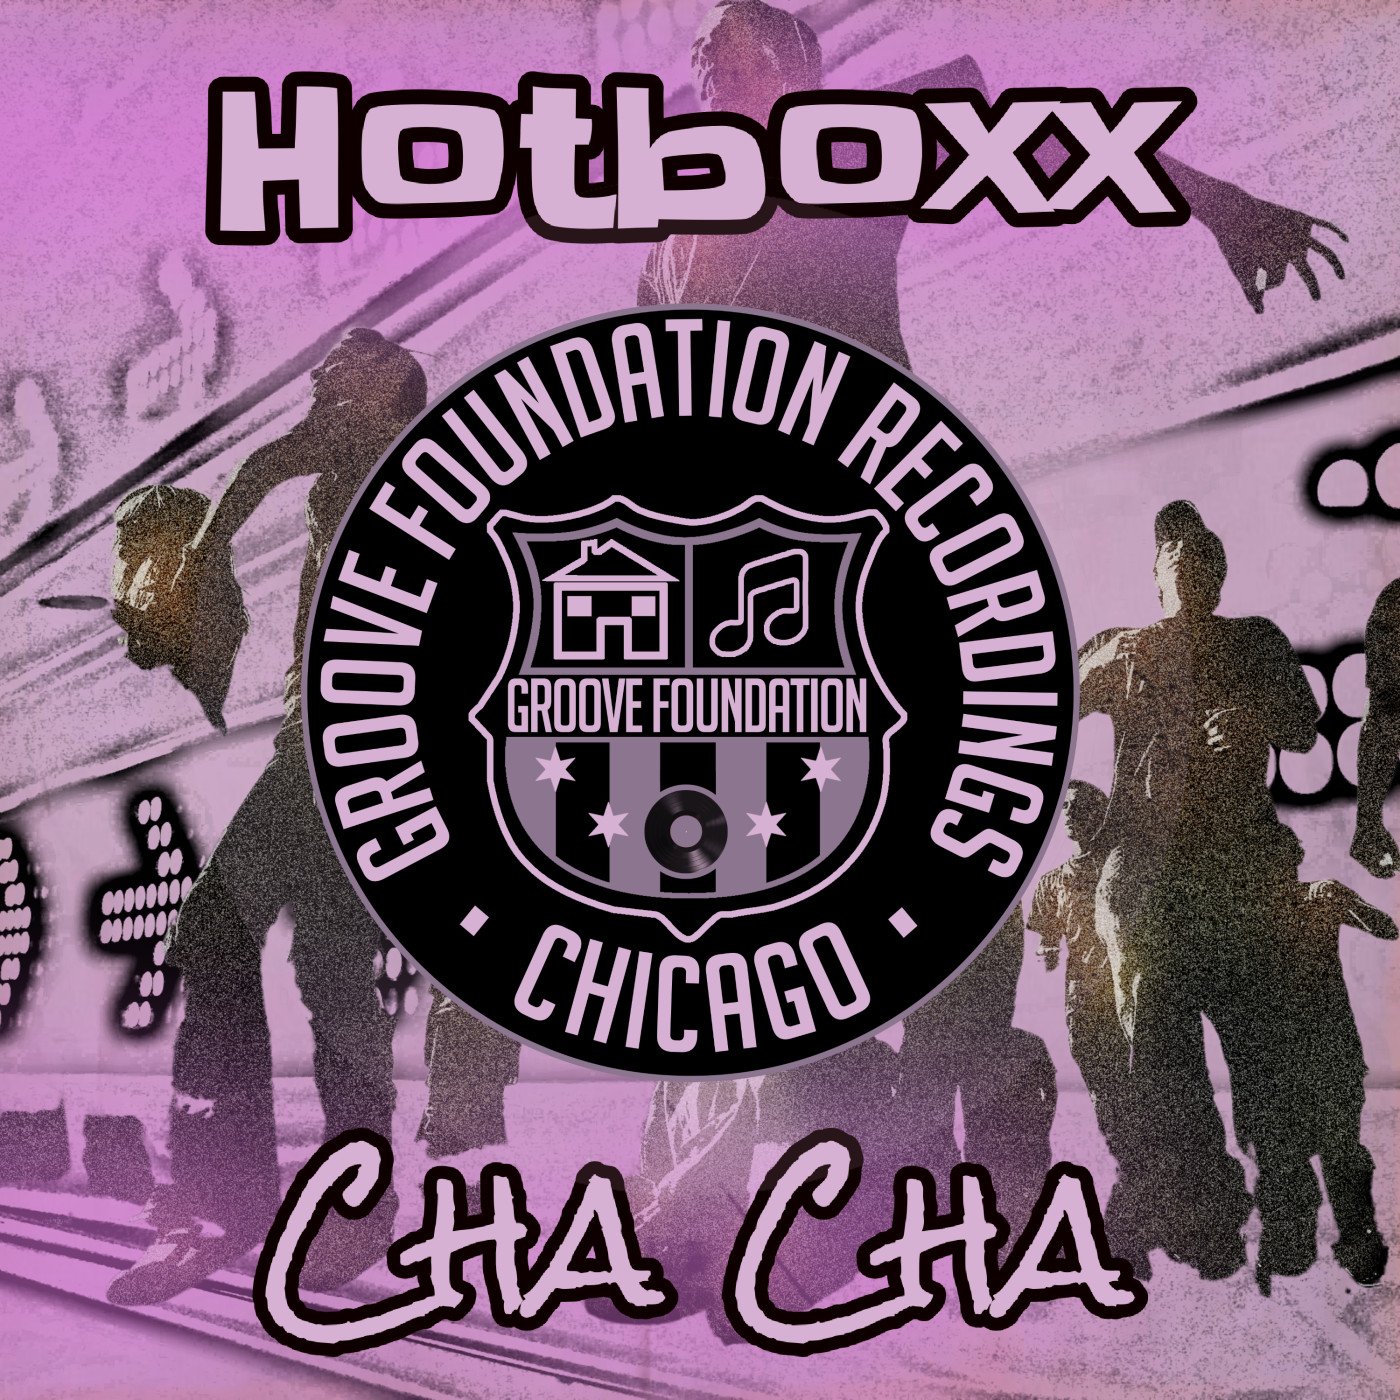 Get Ready to Groove: Hotboxx's Latest Release 'CHA CHA' Brings Funky Beats and Infectious Rhythms